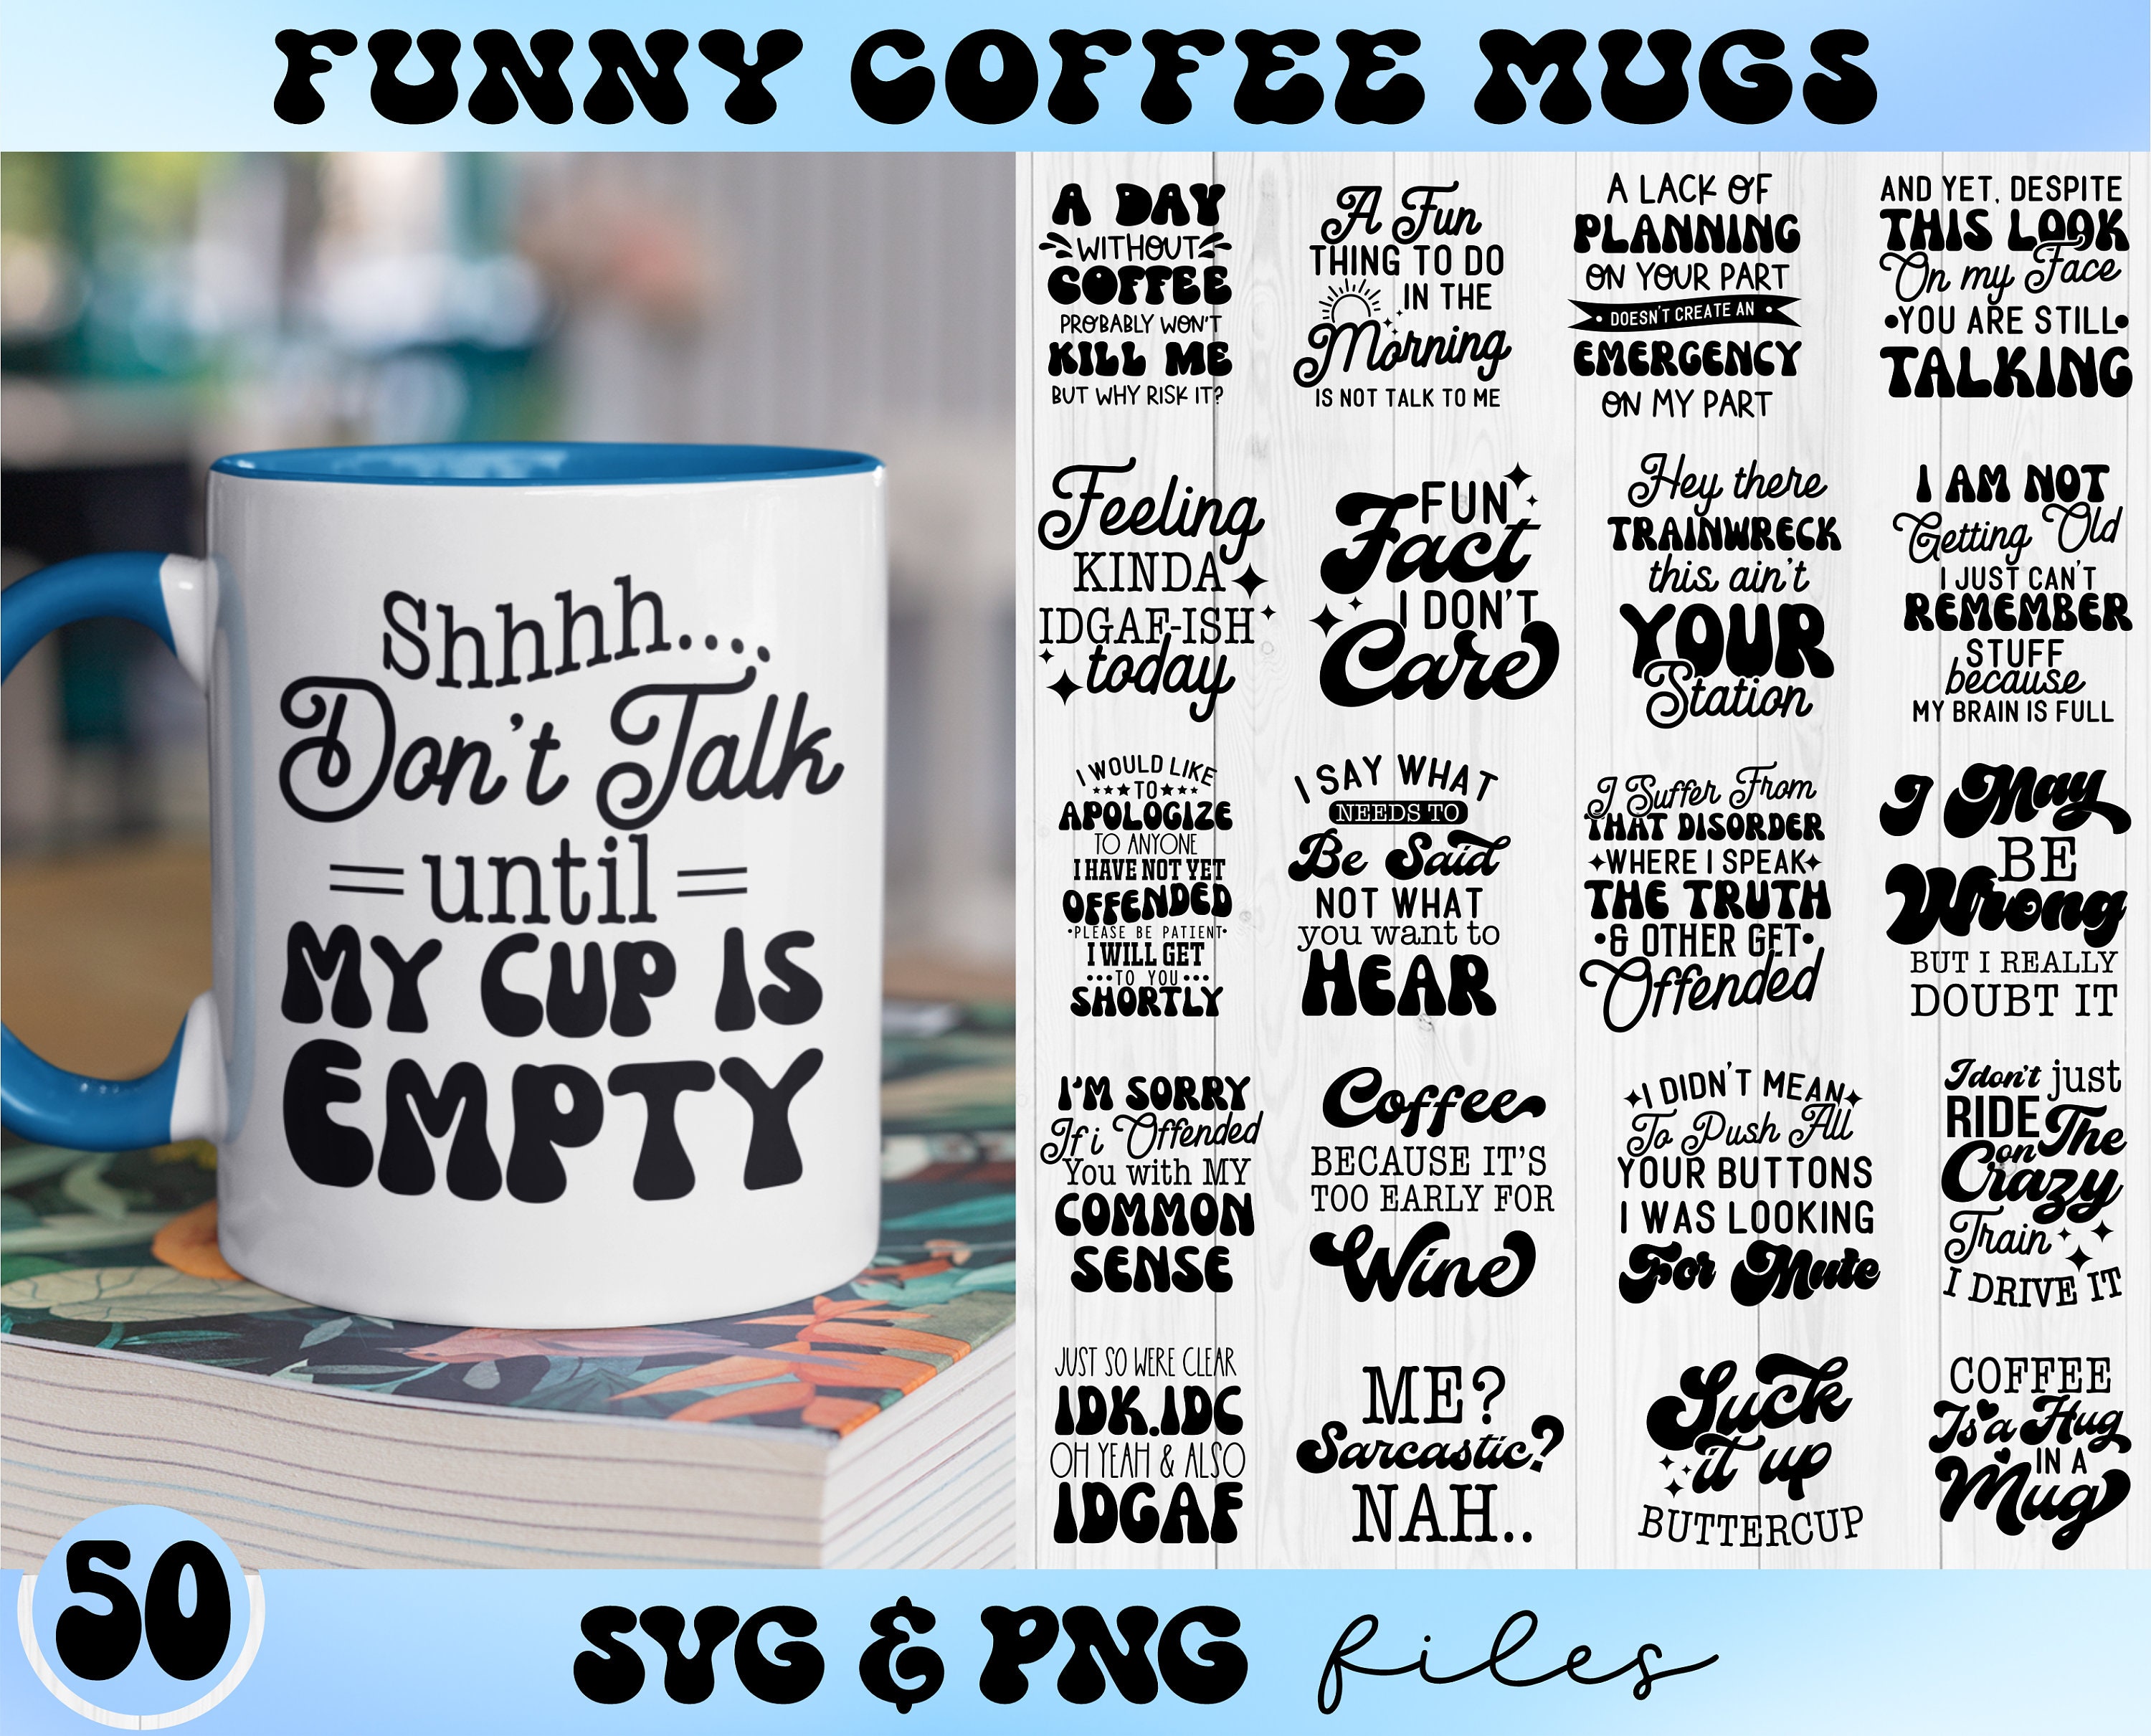 Funny Toddler Mom Mug Personally Victimized By My Toddler Travel Coffe –  Cute But Rude